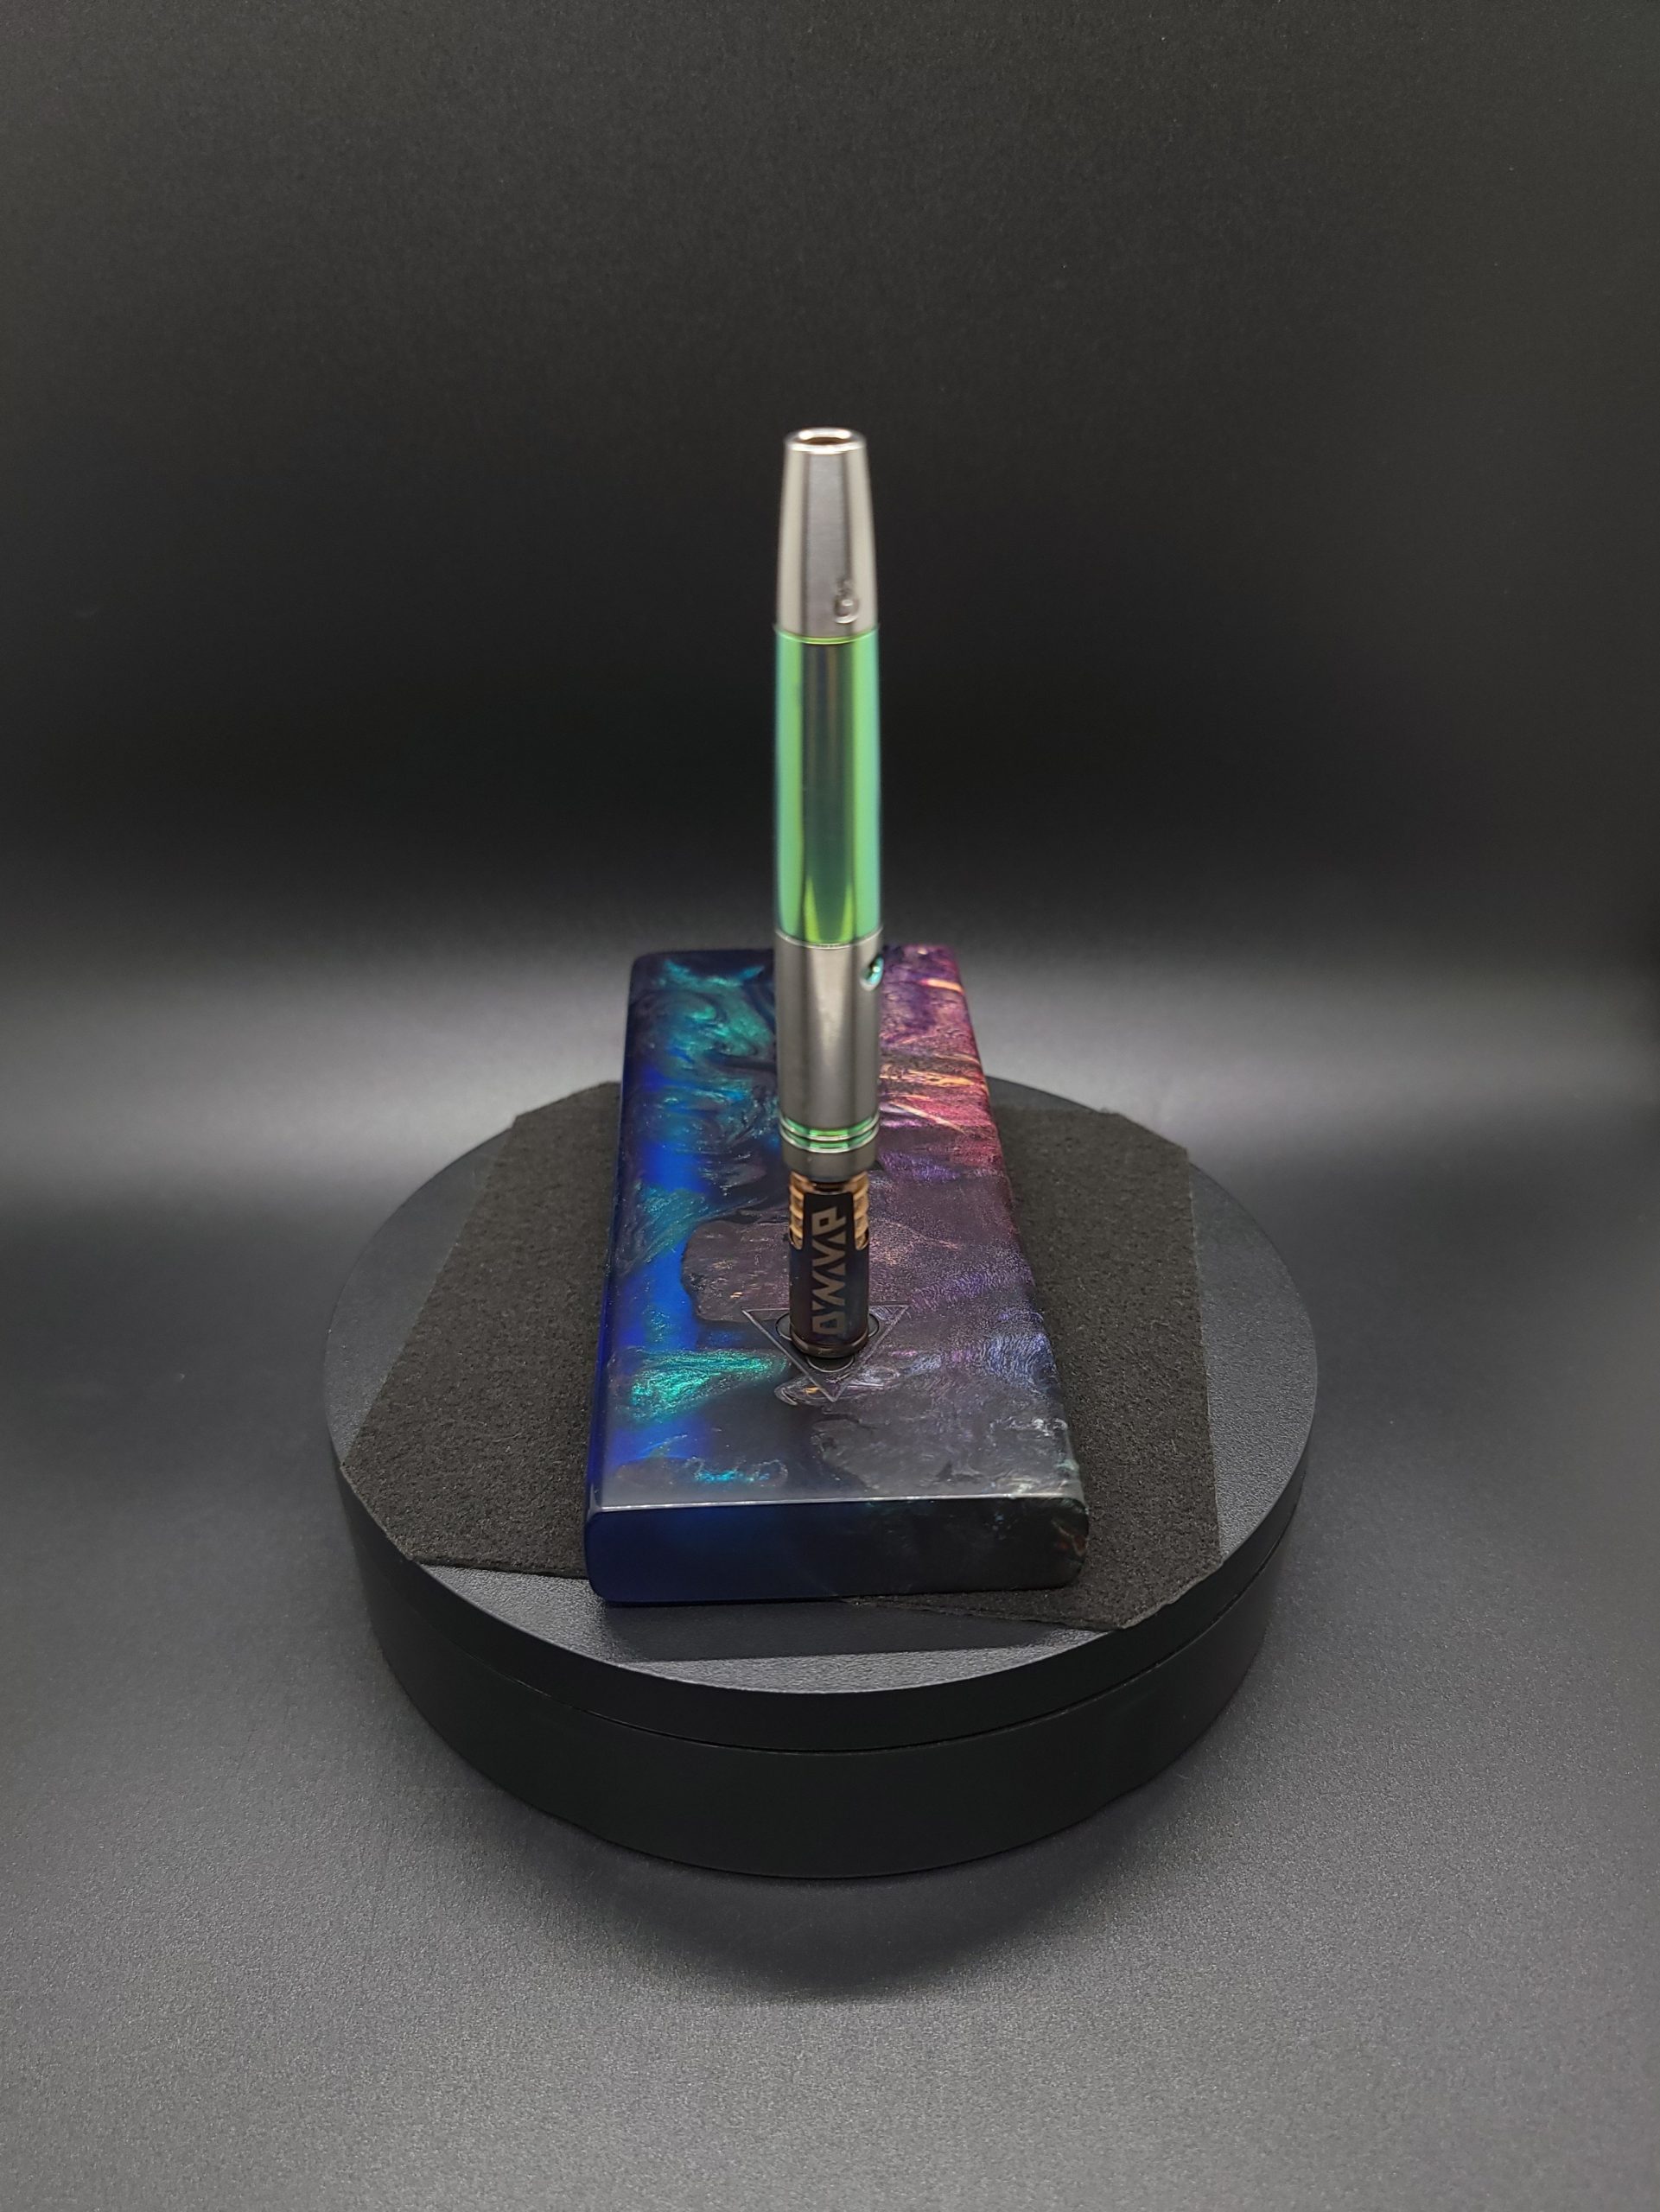 This image portrays 2G-Stash-Burl Hybrid-XL & Standard-Luminescent Dual Dynavap Case by Dovetail Woodwork.